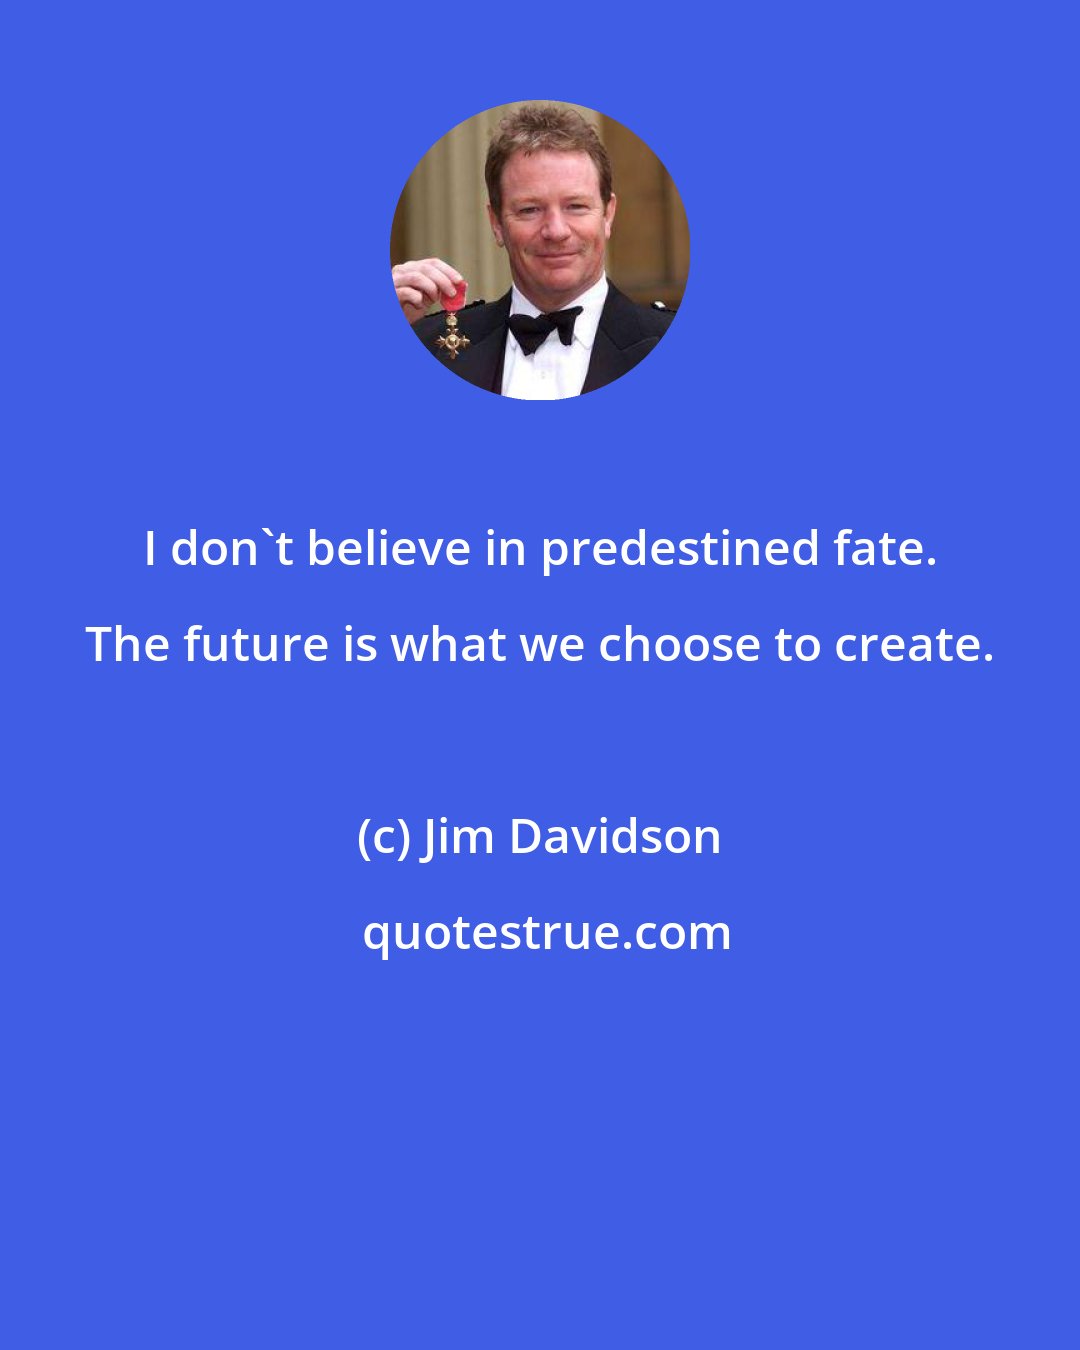 Jim Davidson: I don't believe in predestined fate. The future is what we choose to create.